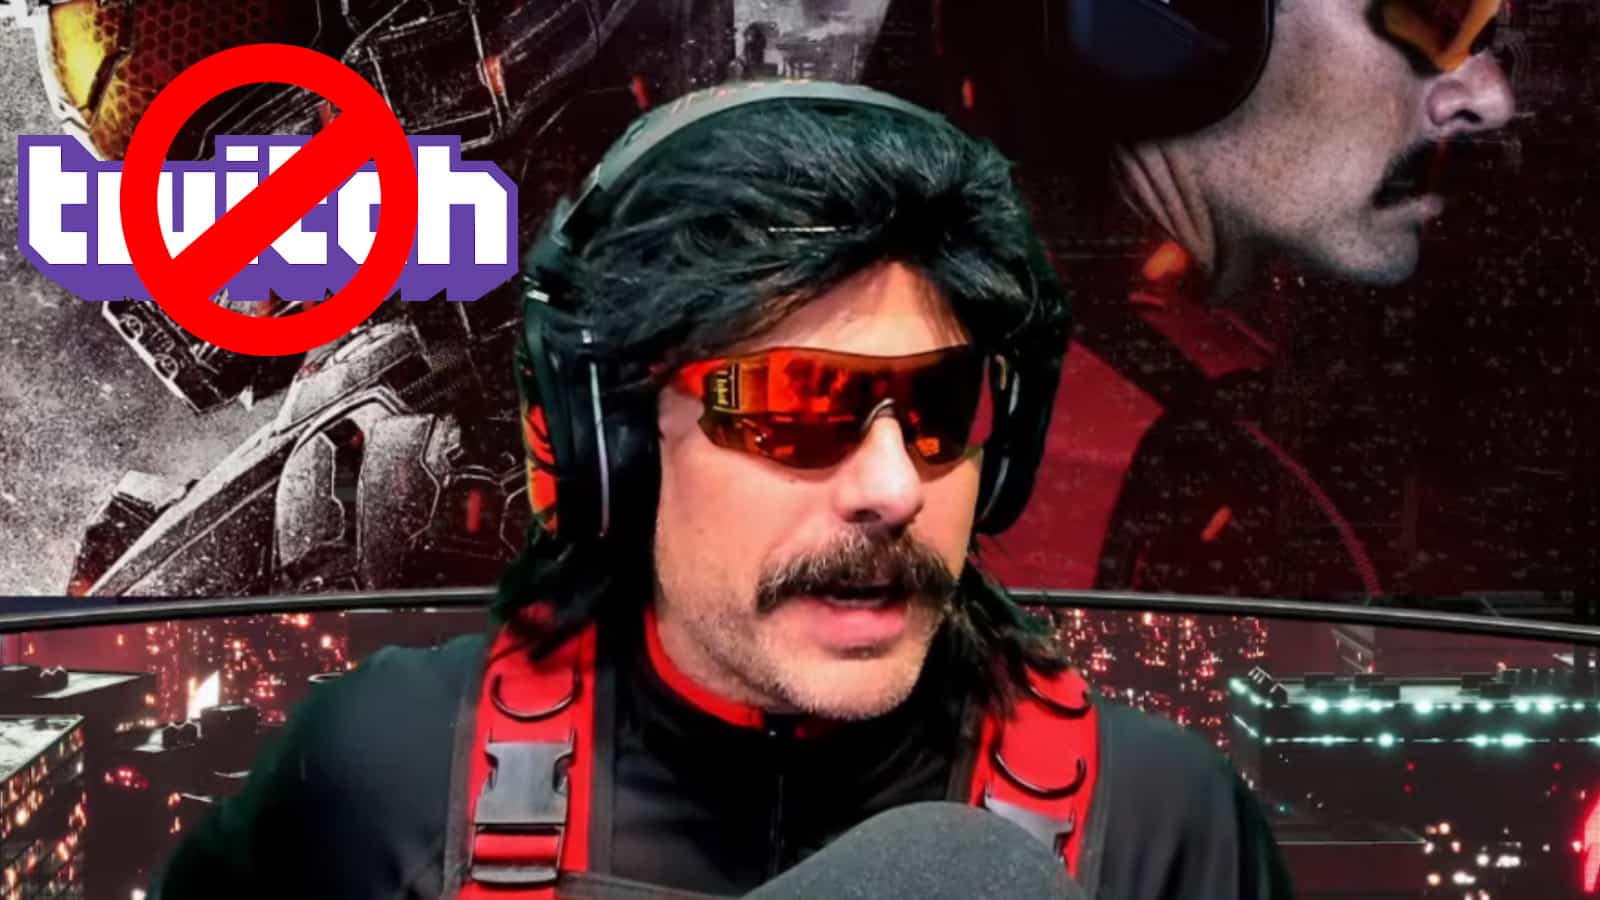 DrDisrespect cuts ties with esports awards over twitch ban